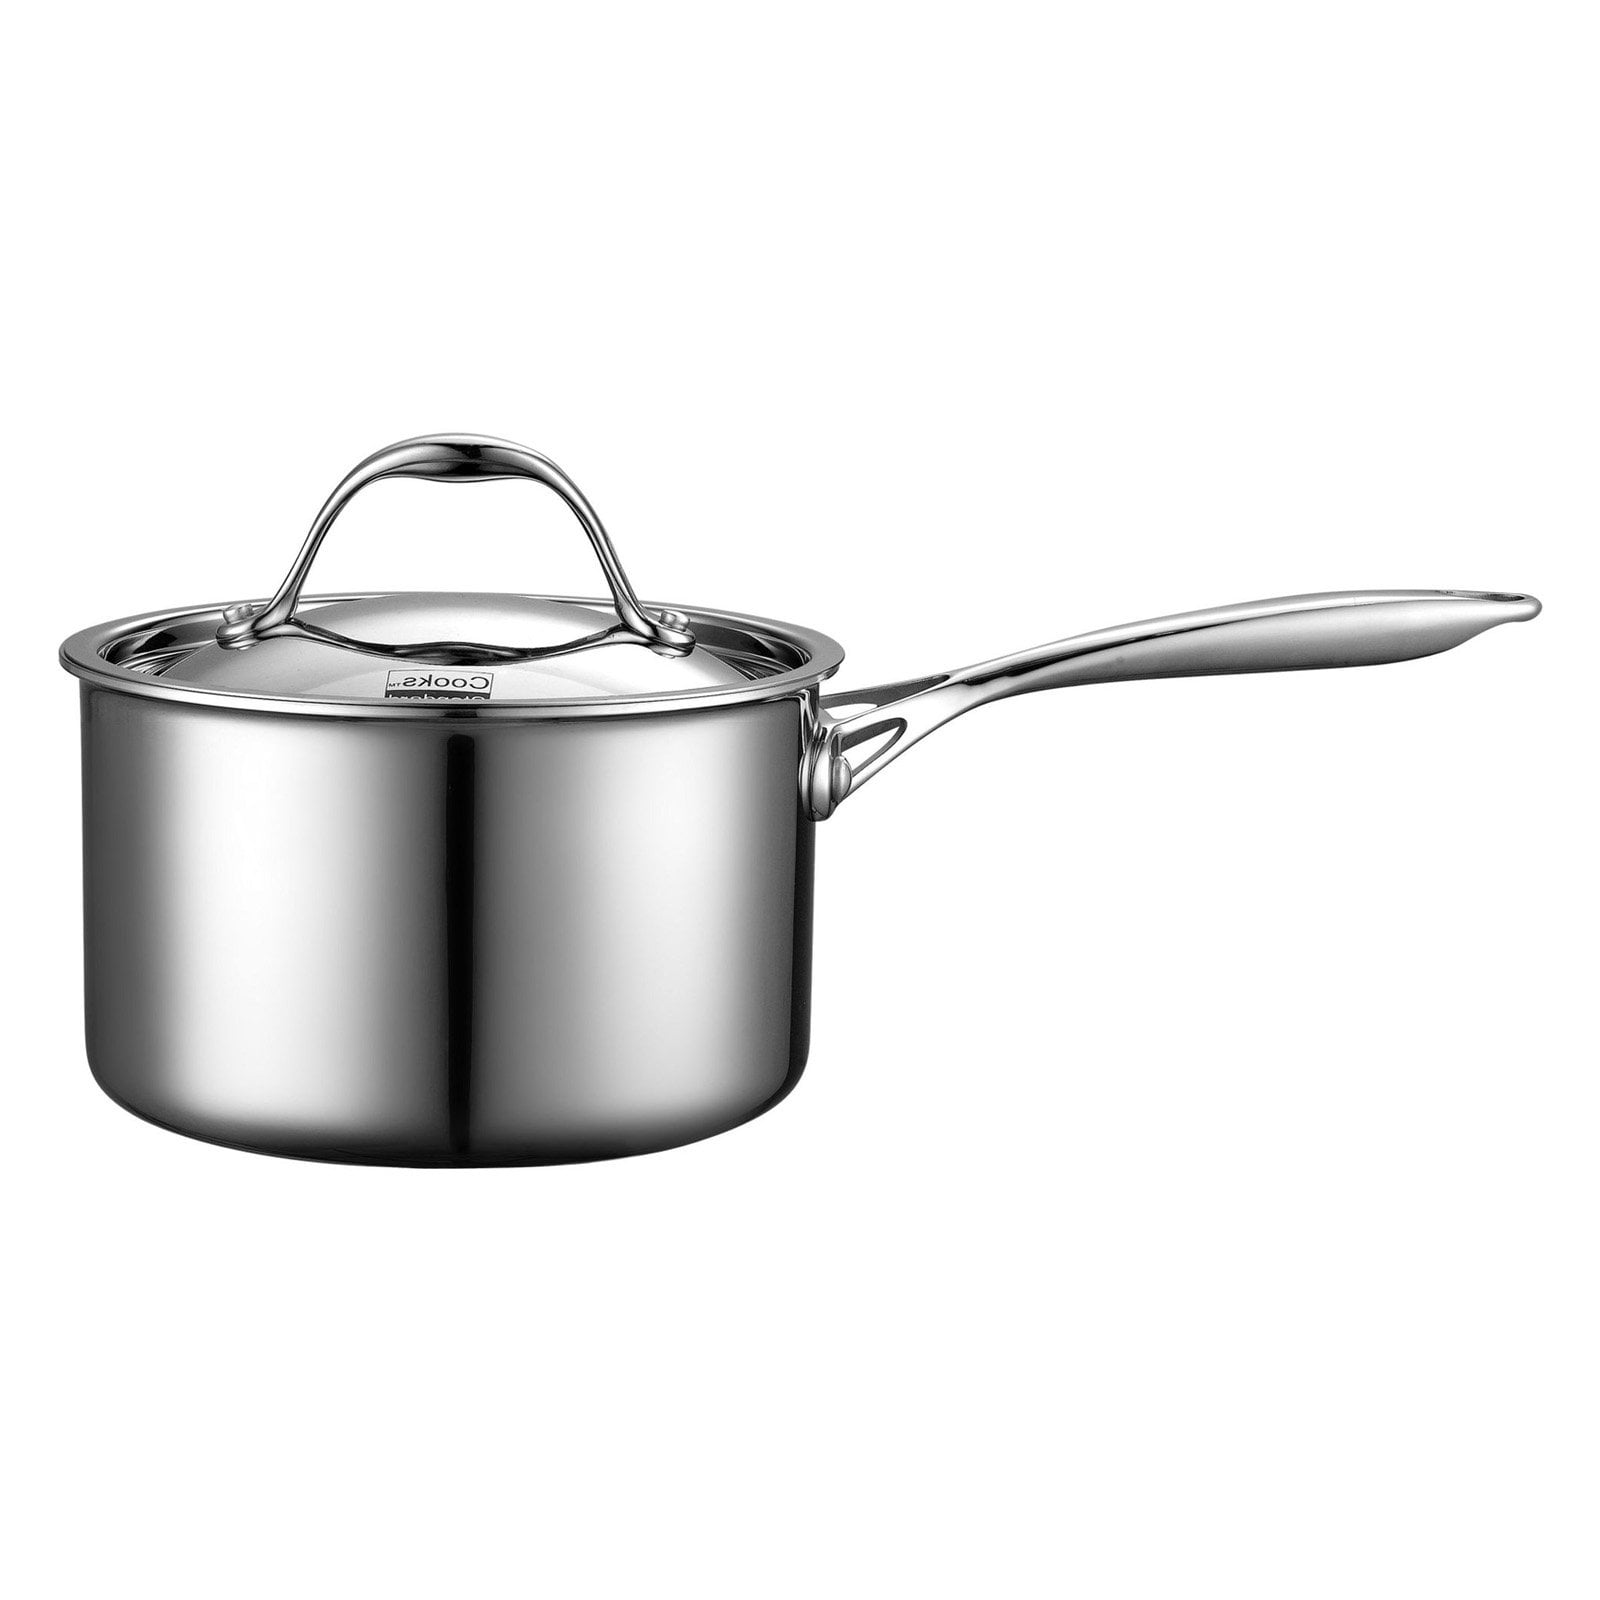 1/2/3QT Saucepan with Lid Set of 3, E-far 18/10 Stainless Steel Sauce Pan  Pot Metal Triply Cookware for Kitchen Cooking Pasta Warming Milk Boiling